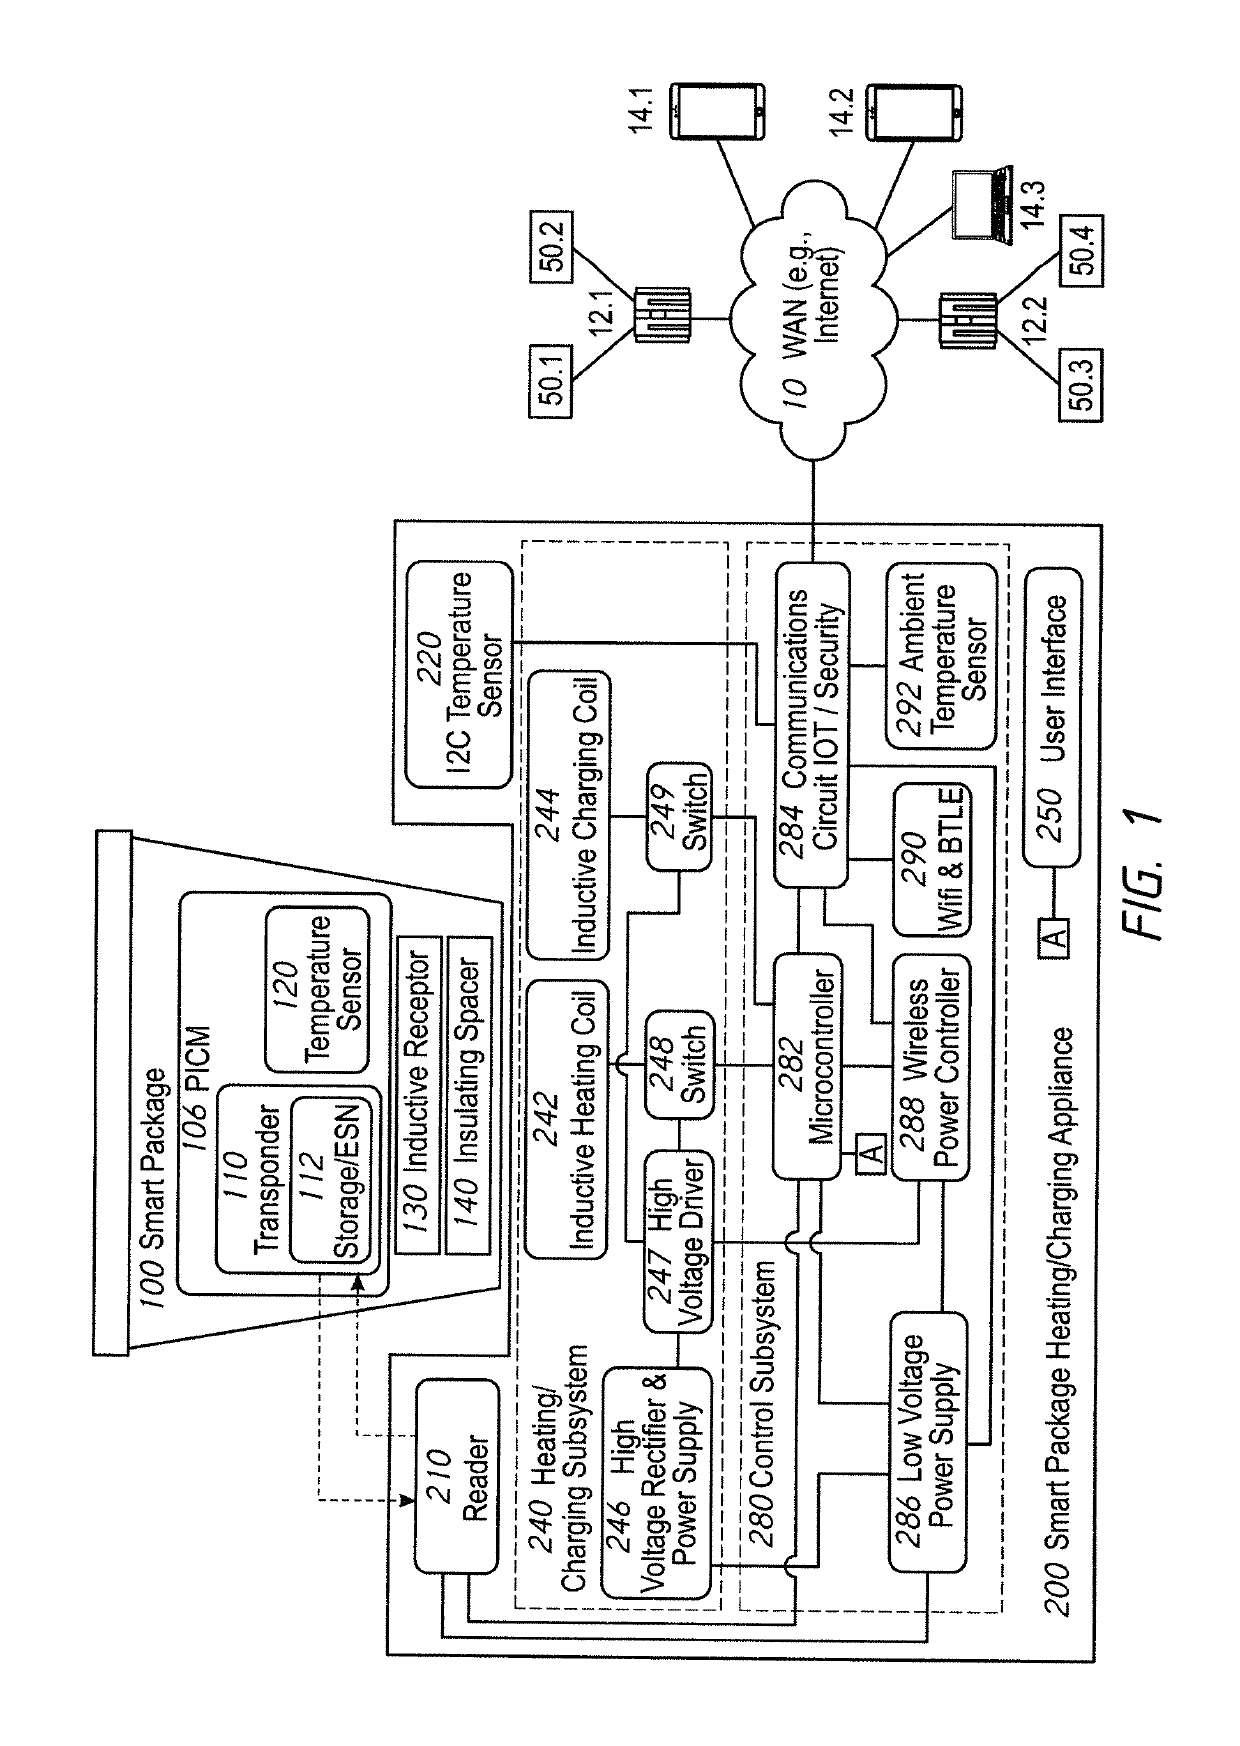 Smart packages systems and methods